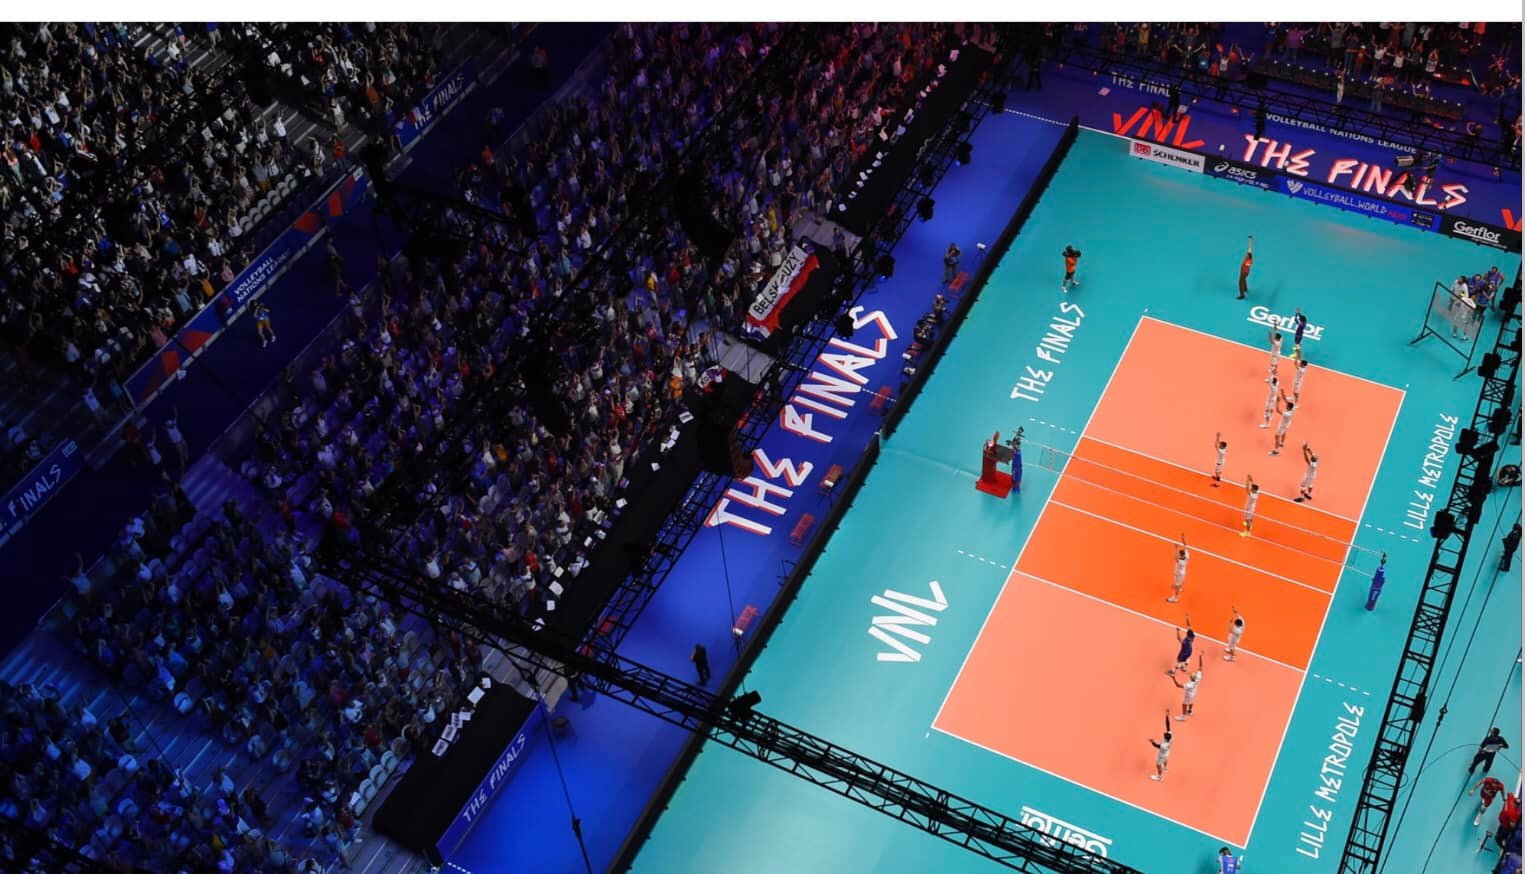 VOLLEYBALL NATIONS LEAGUE READY TO BRING FANS CLOSER TO ACTION IN 2022